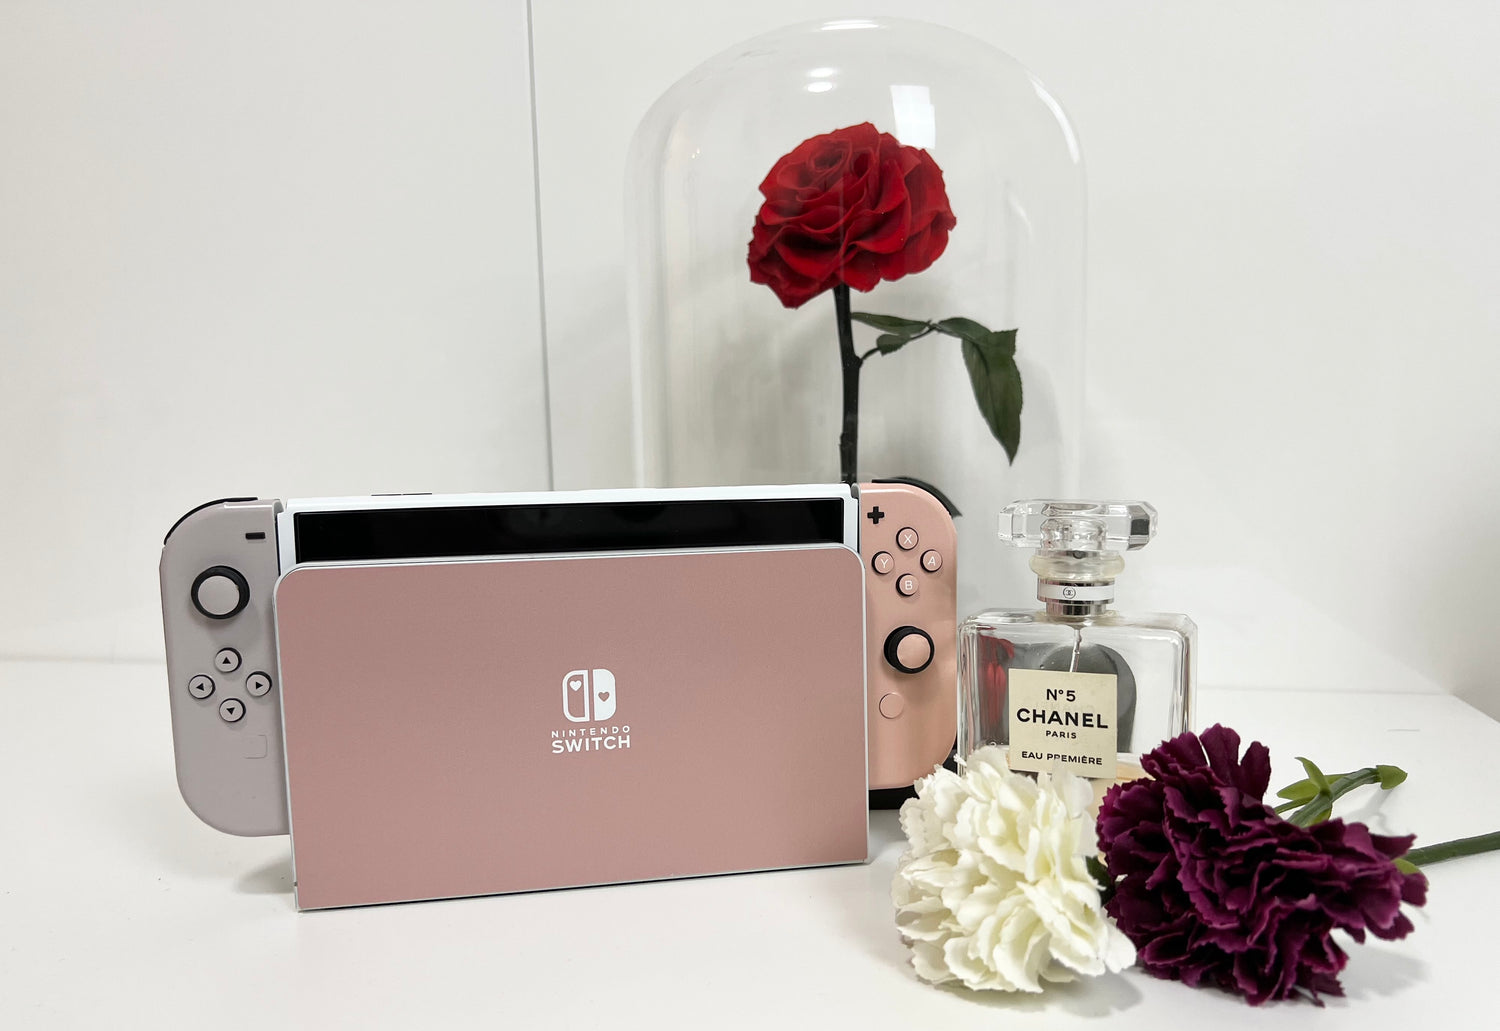 Fornite Limited Edition Nintendo Switch OLED Skin – Lux Skins Official